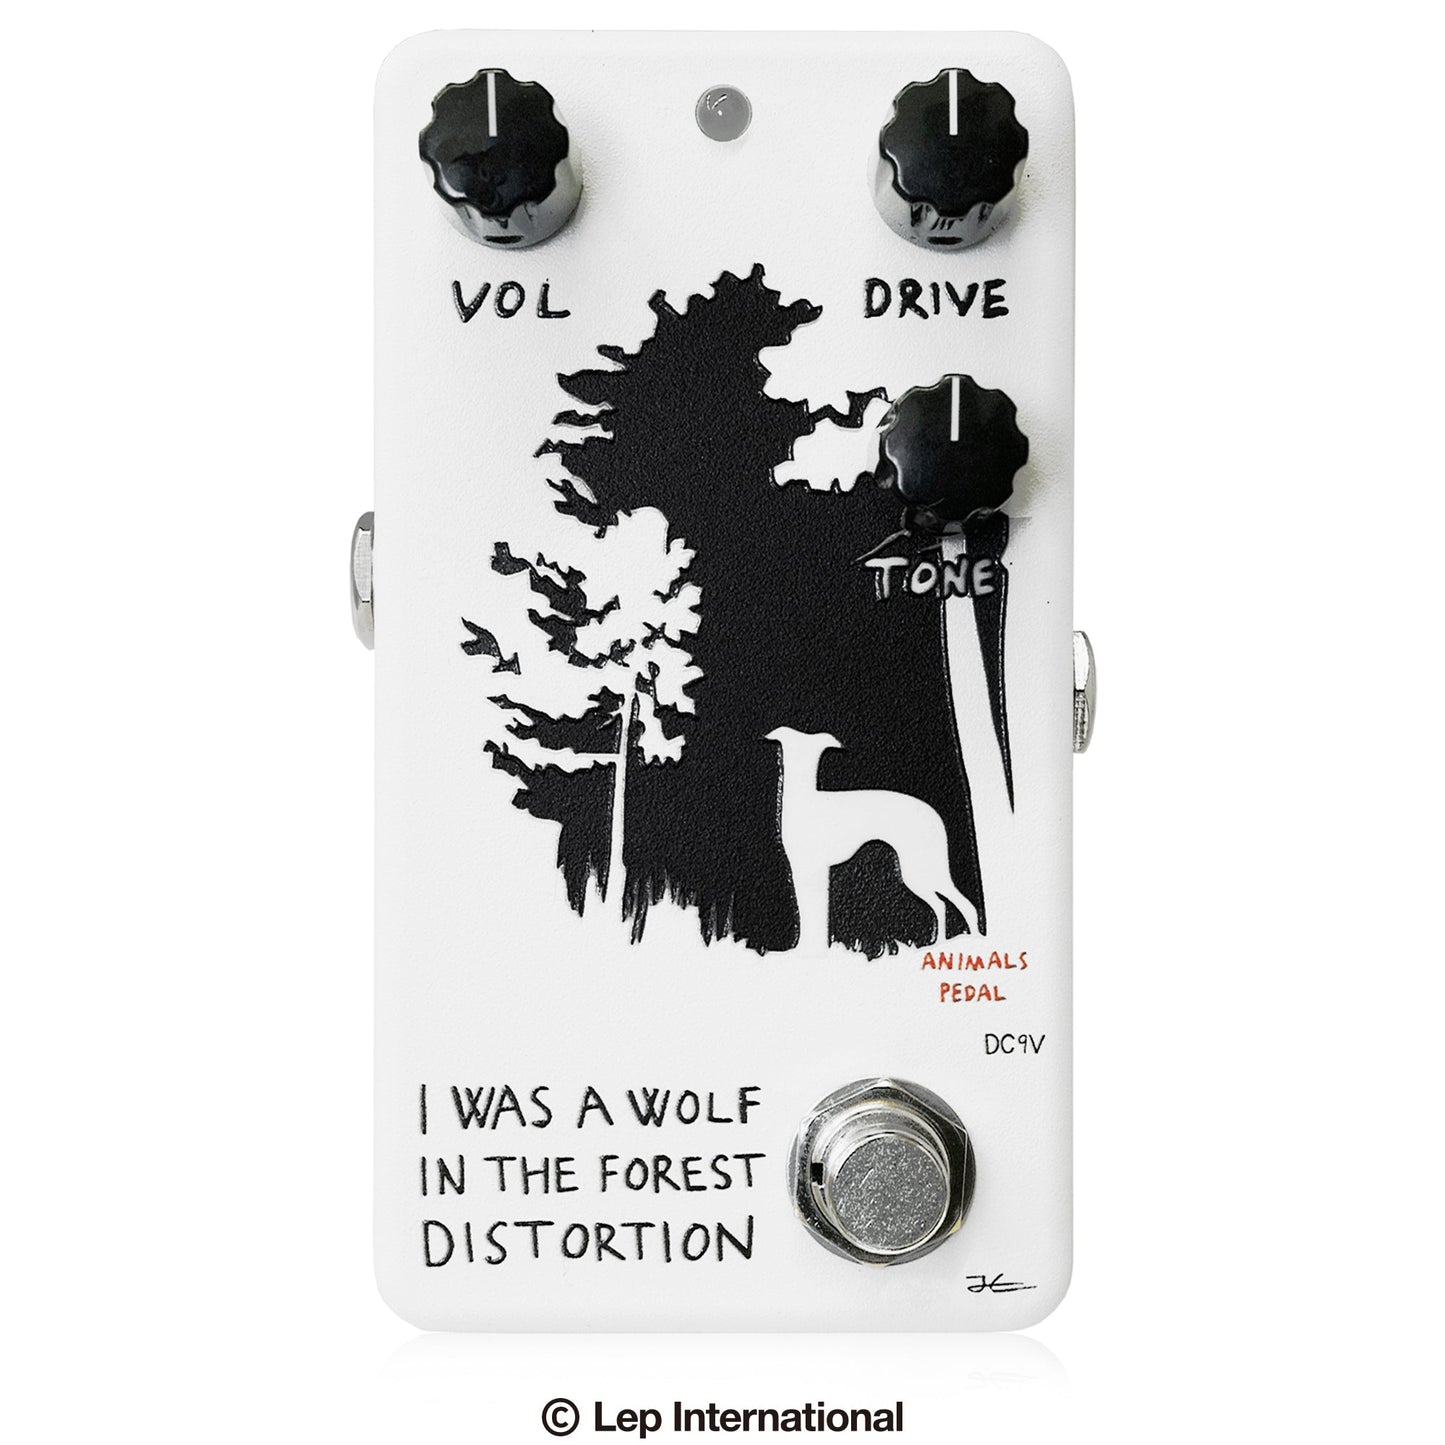 Animals Pedal/I Was A Wolf In The Forest Distortion